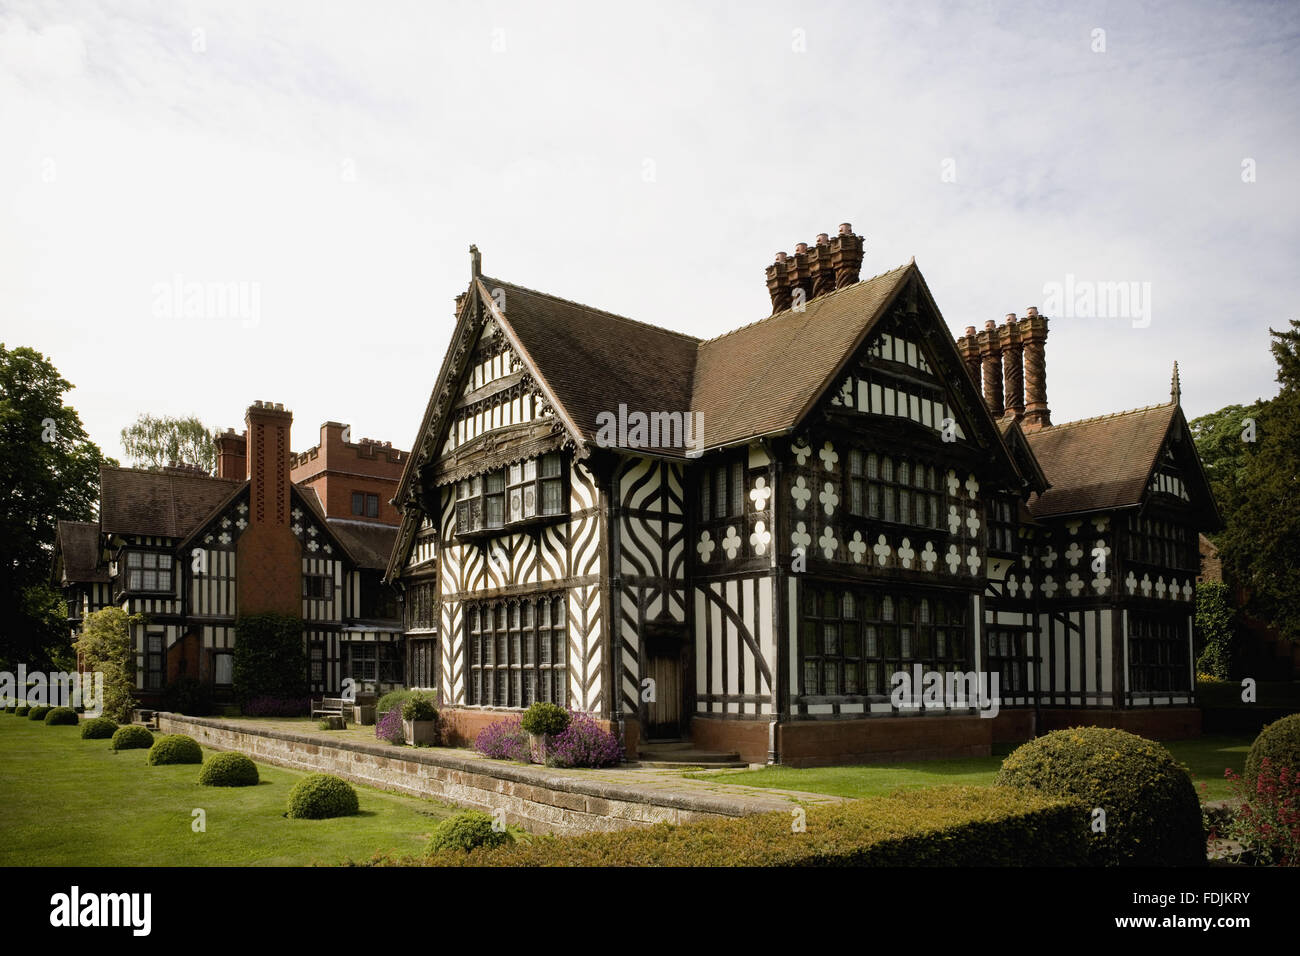 Wightwick Manor, Wolverhampton, West Midlands, designed by Edward Ould for the Mander family and built between 1887-8. It is in an 'Old English' style using a mixture of timber-framing with plaster, red brick and stone. Stock Photo